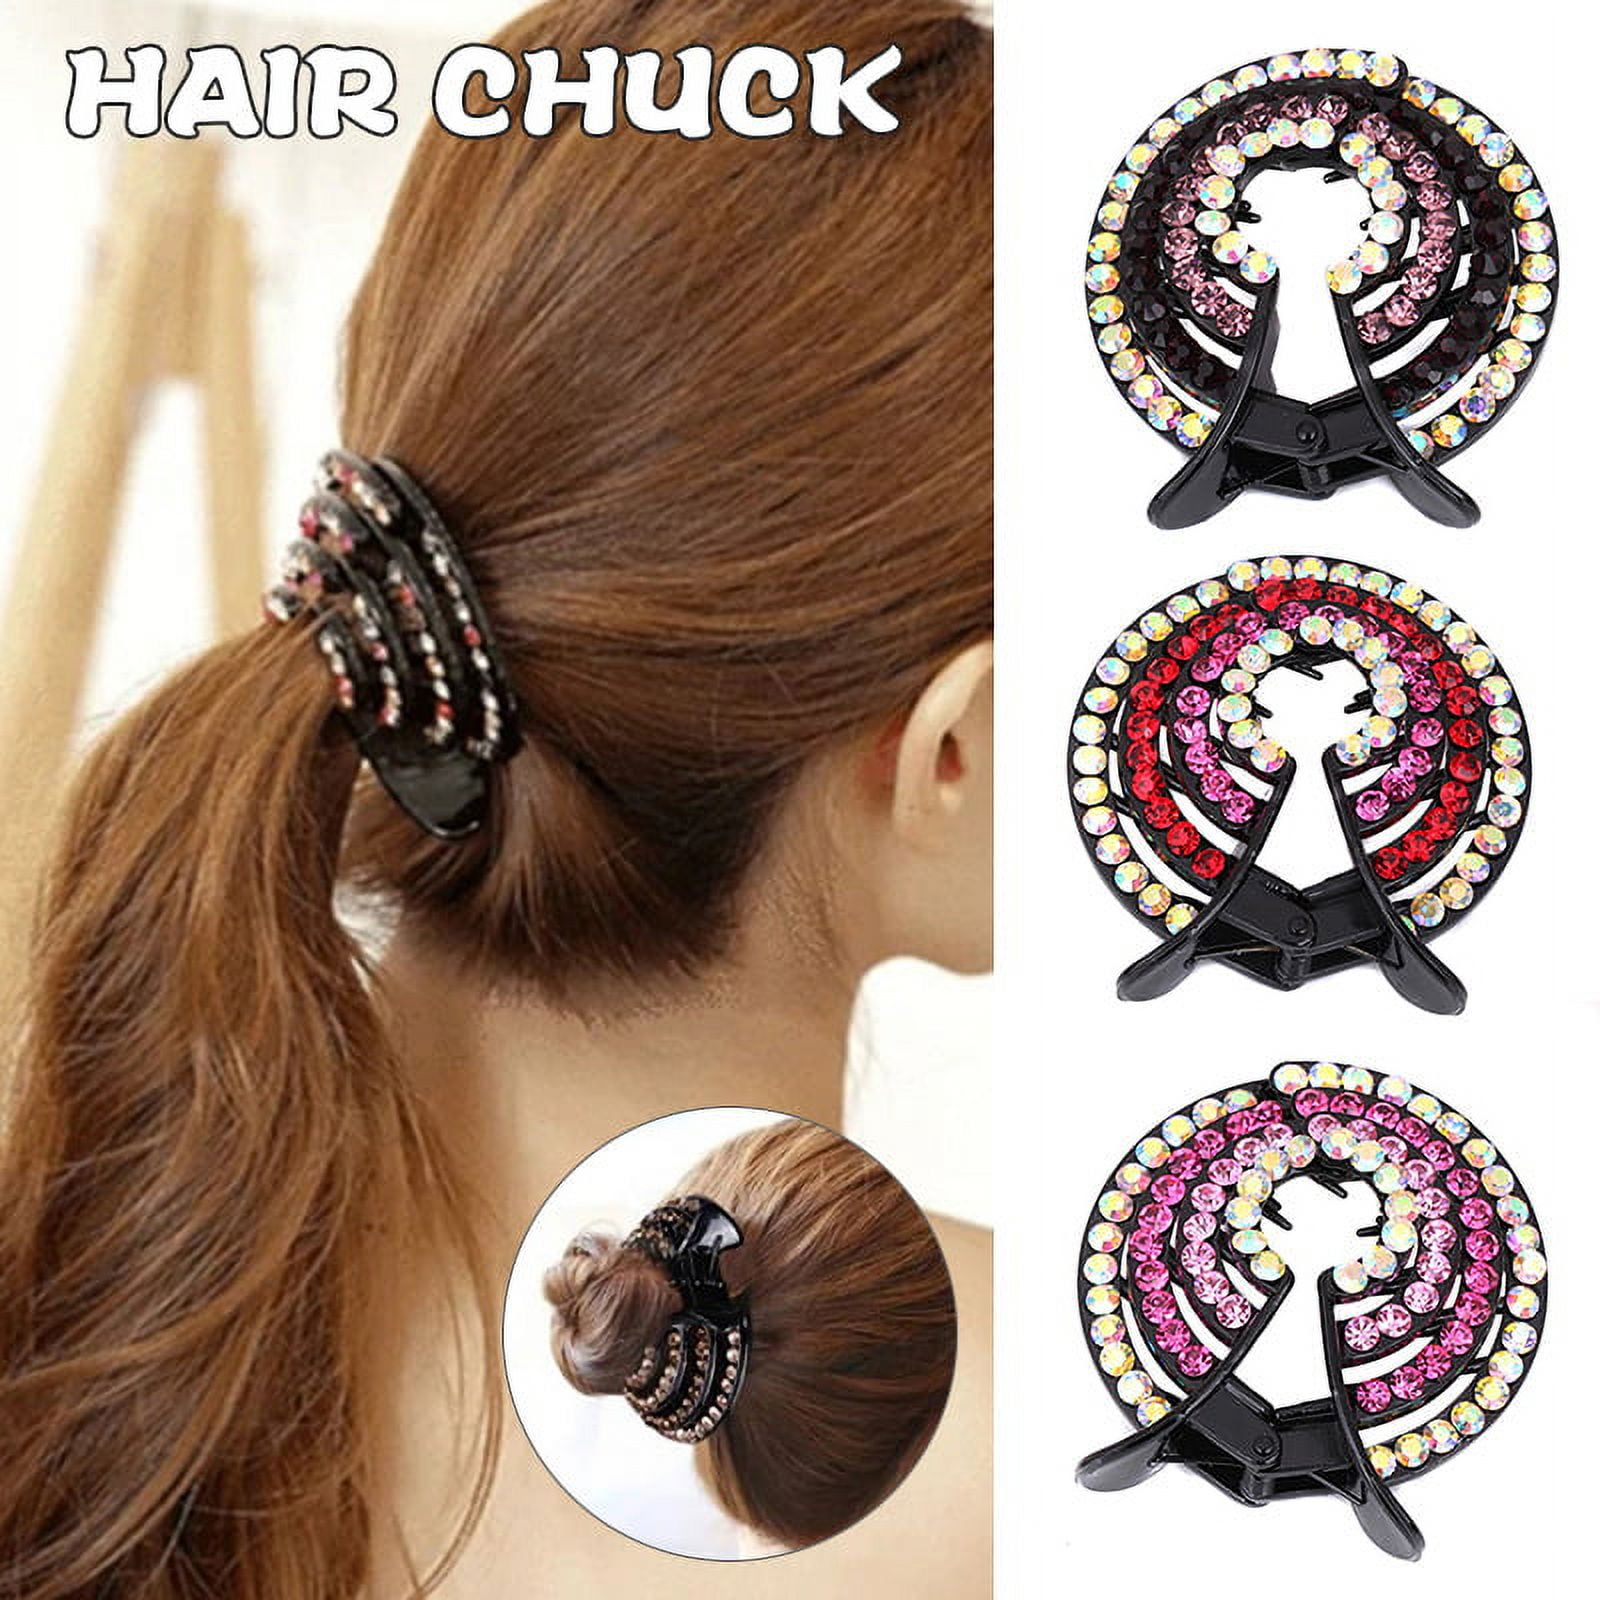 2 Pack 3.5inch White Rhinestone Hair Bows for Girls Cute Pearls Hair Bow  with Alligator Hair Clips Beads Hairgrip for Kids Toddlers Teens Children